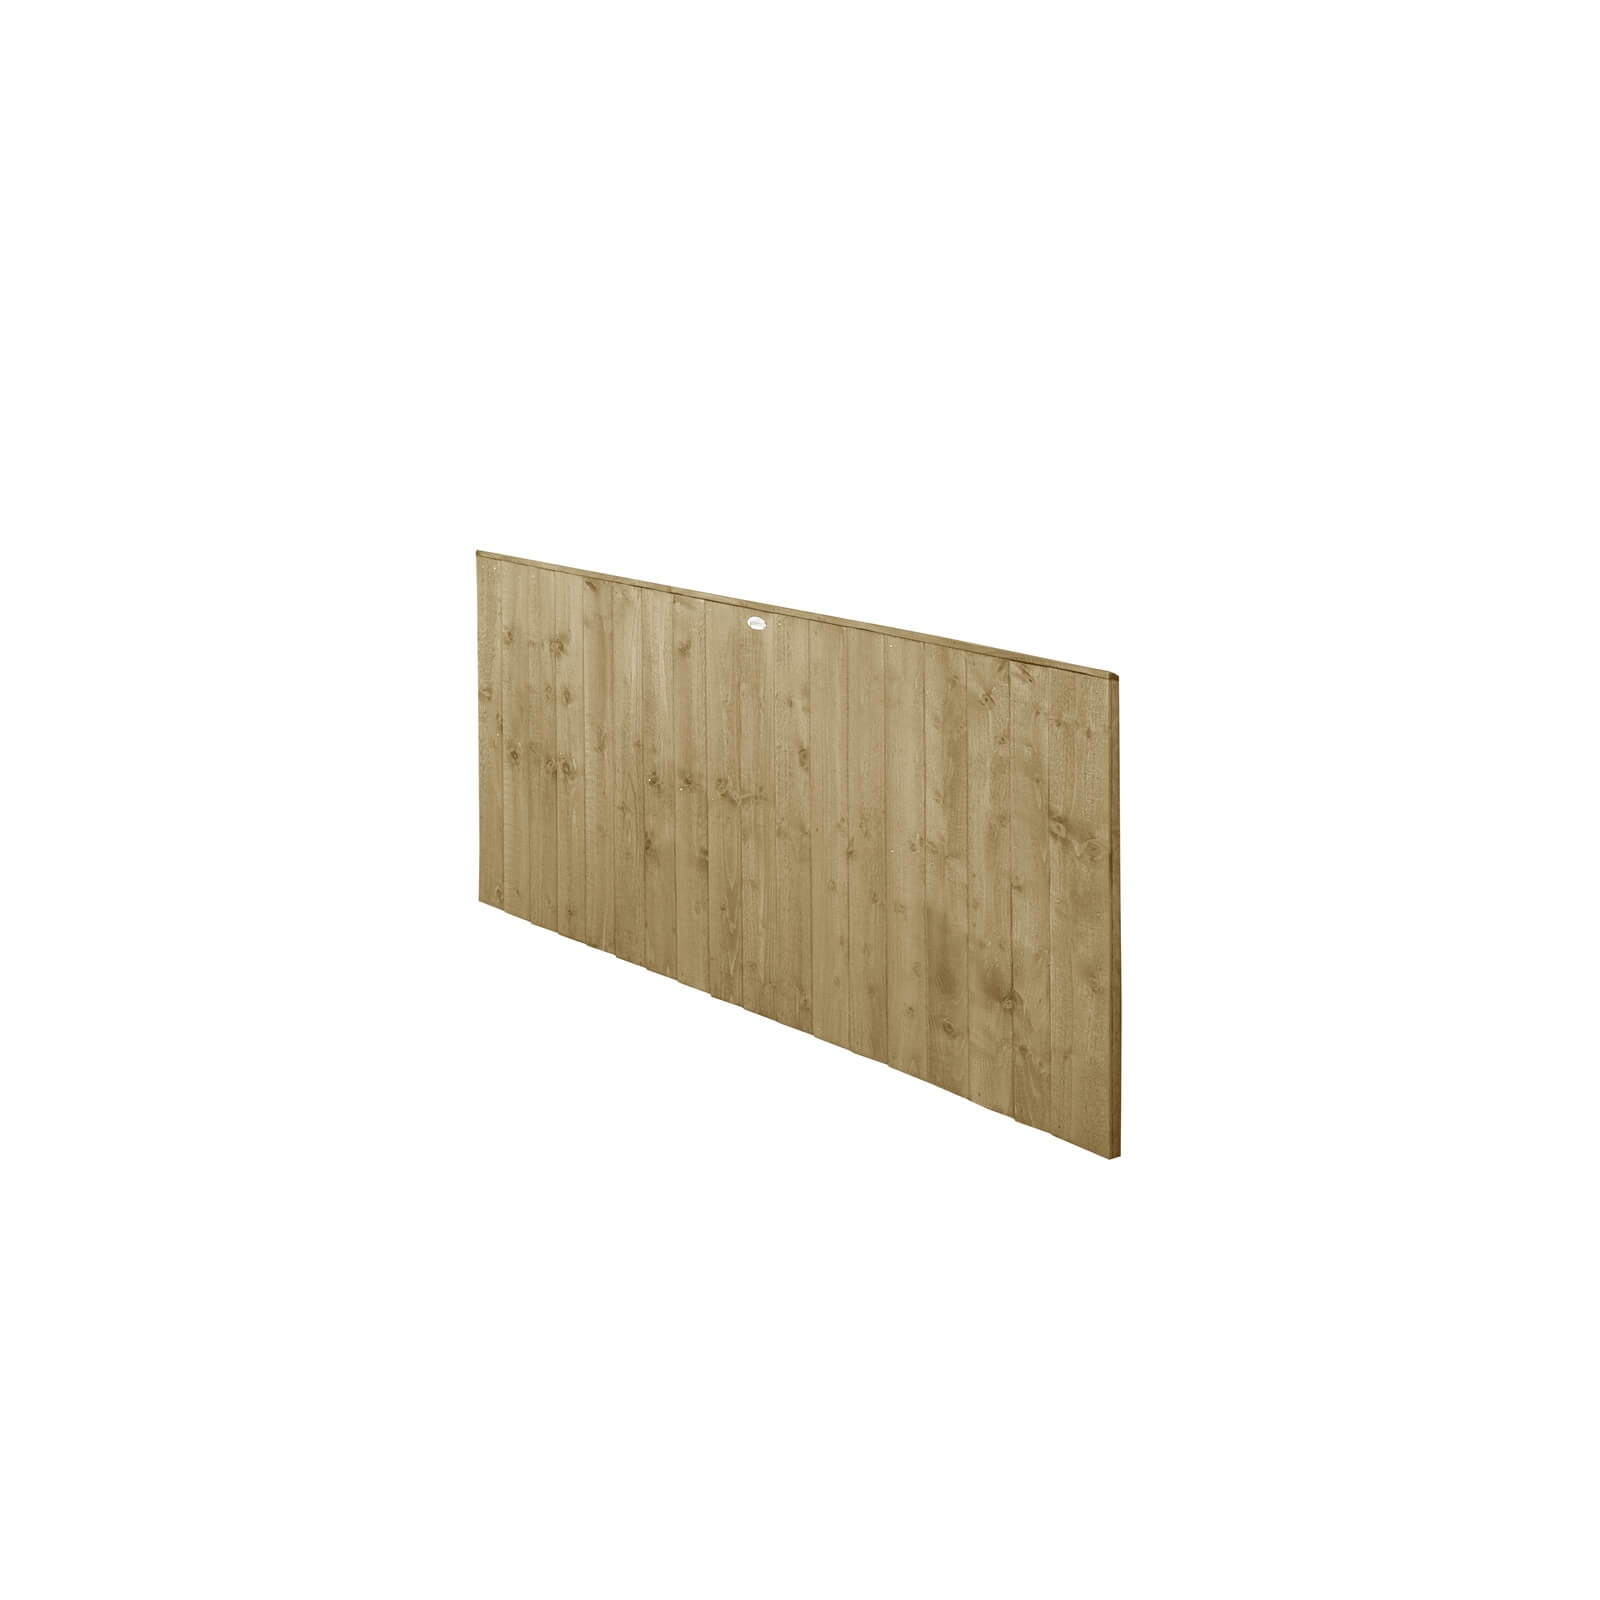 6ft x 3ft (1.83m x 0.93m) Pressure Treated Featheredge Fence Panel - Pack of 20